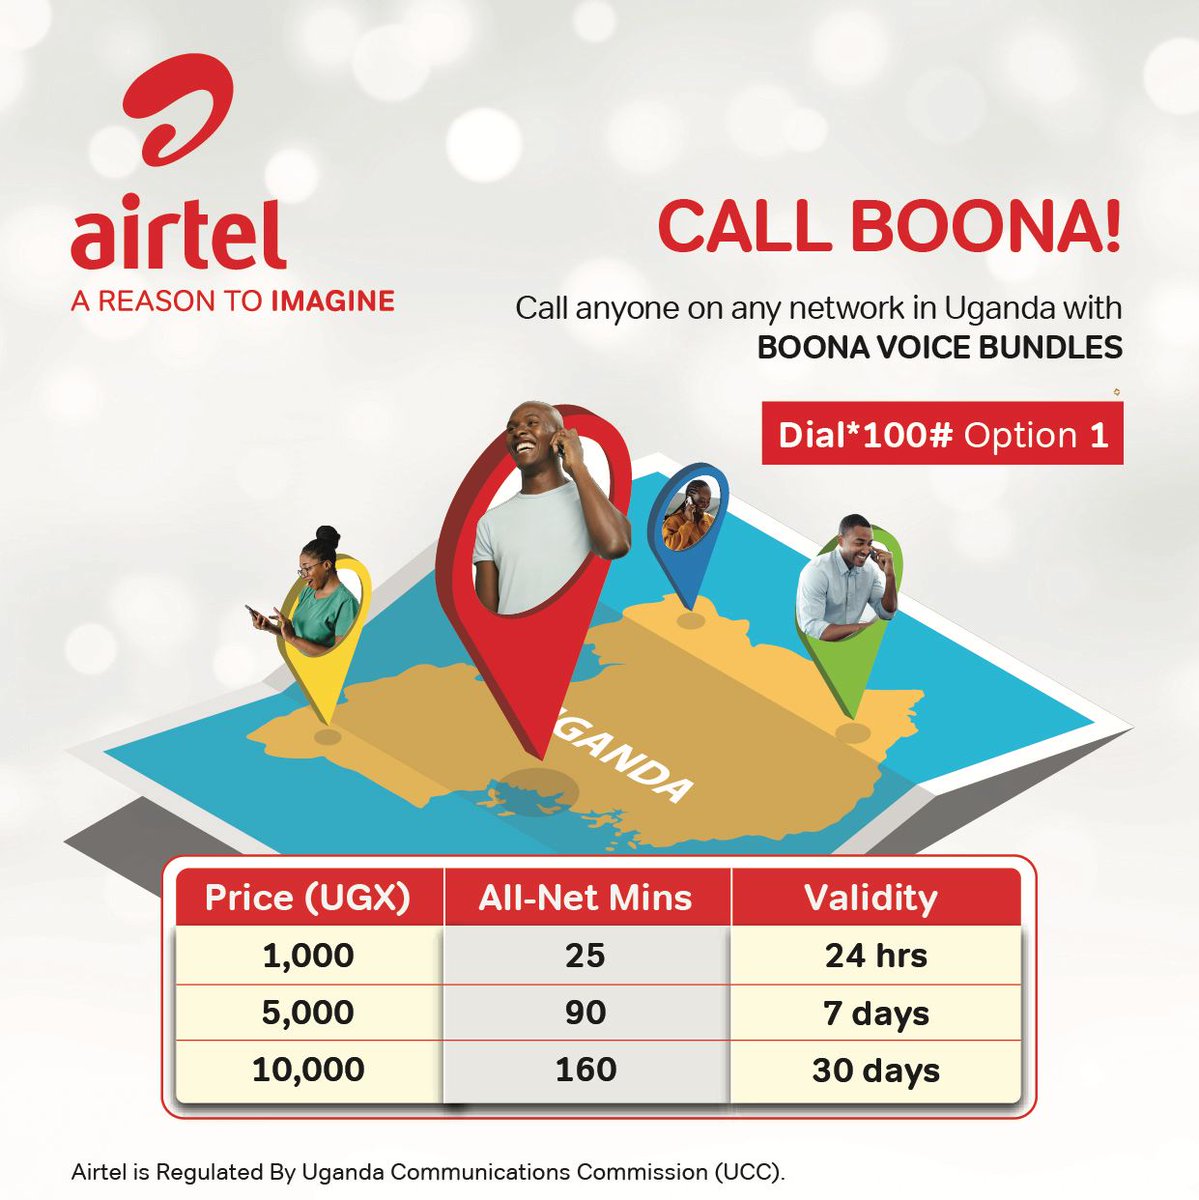 With the Airtel Boona Voice Bundles, you can call anyone on any network in Uganda. Dial *100# and choose Option 1 to get yourself a bundle of your choice. Stay connected with @Airtel_Ug
#AReasonToImagine